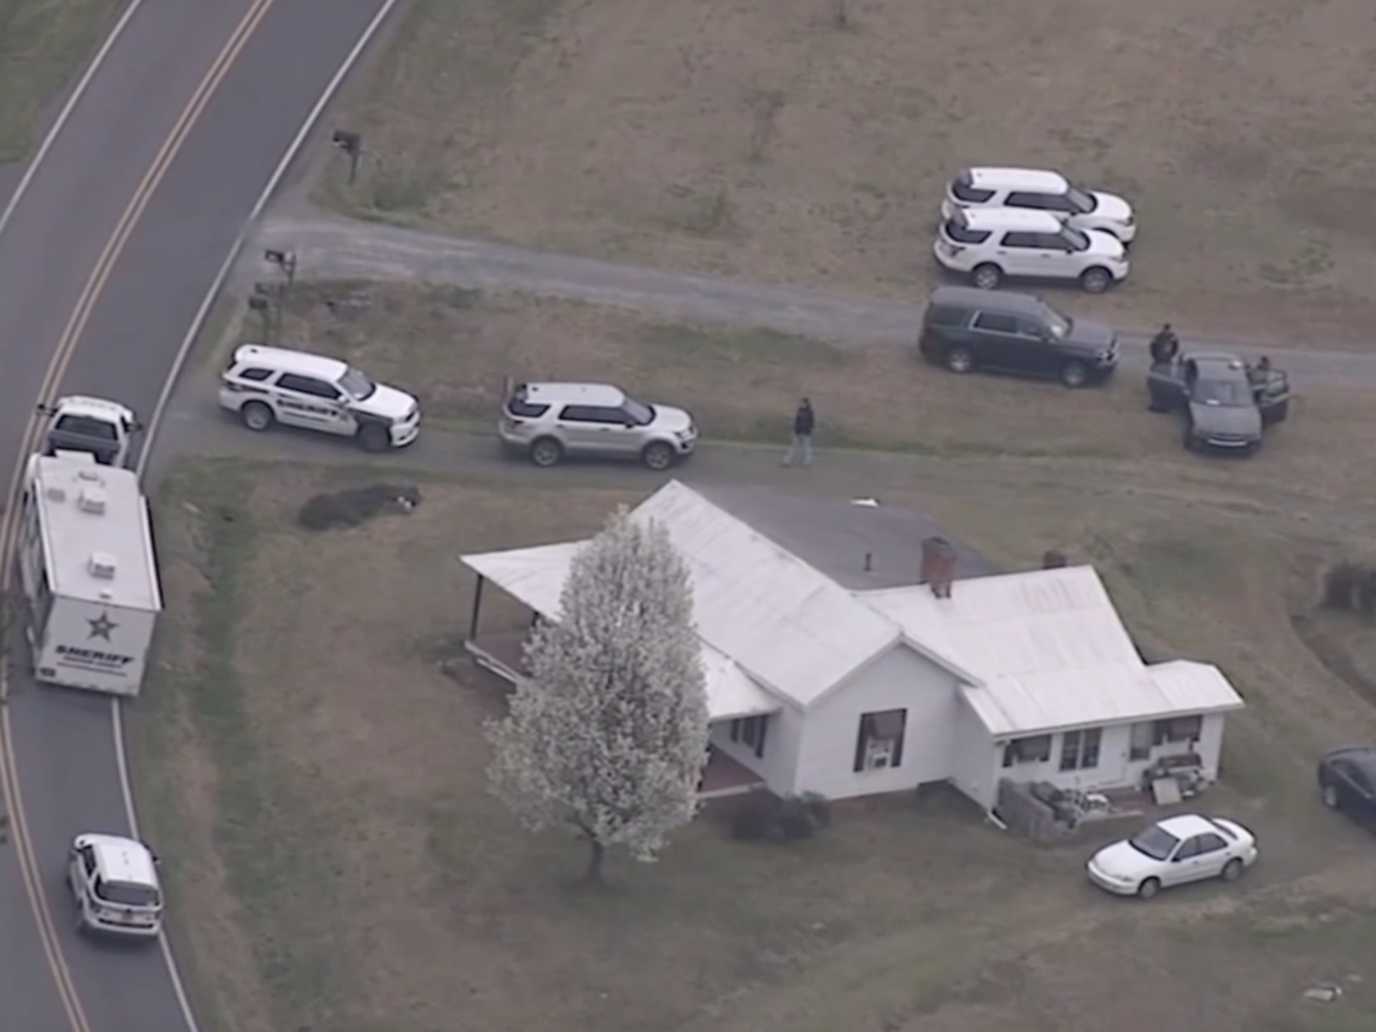 Blood Everywhere: 7 Family Members Dead In Suspected Murder-Suicide In North Carolina